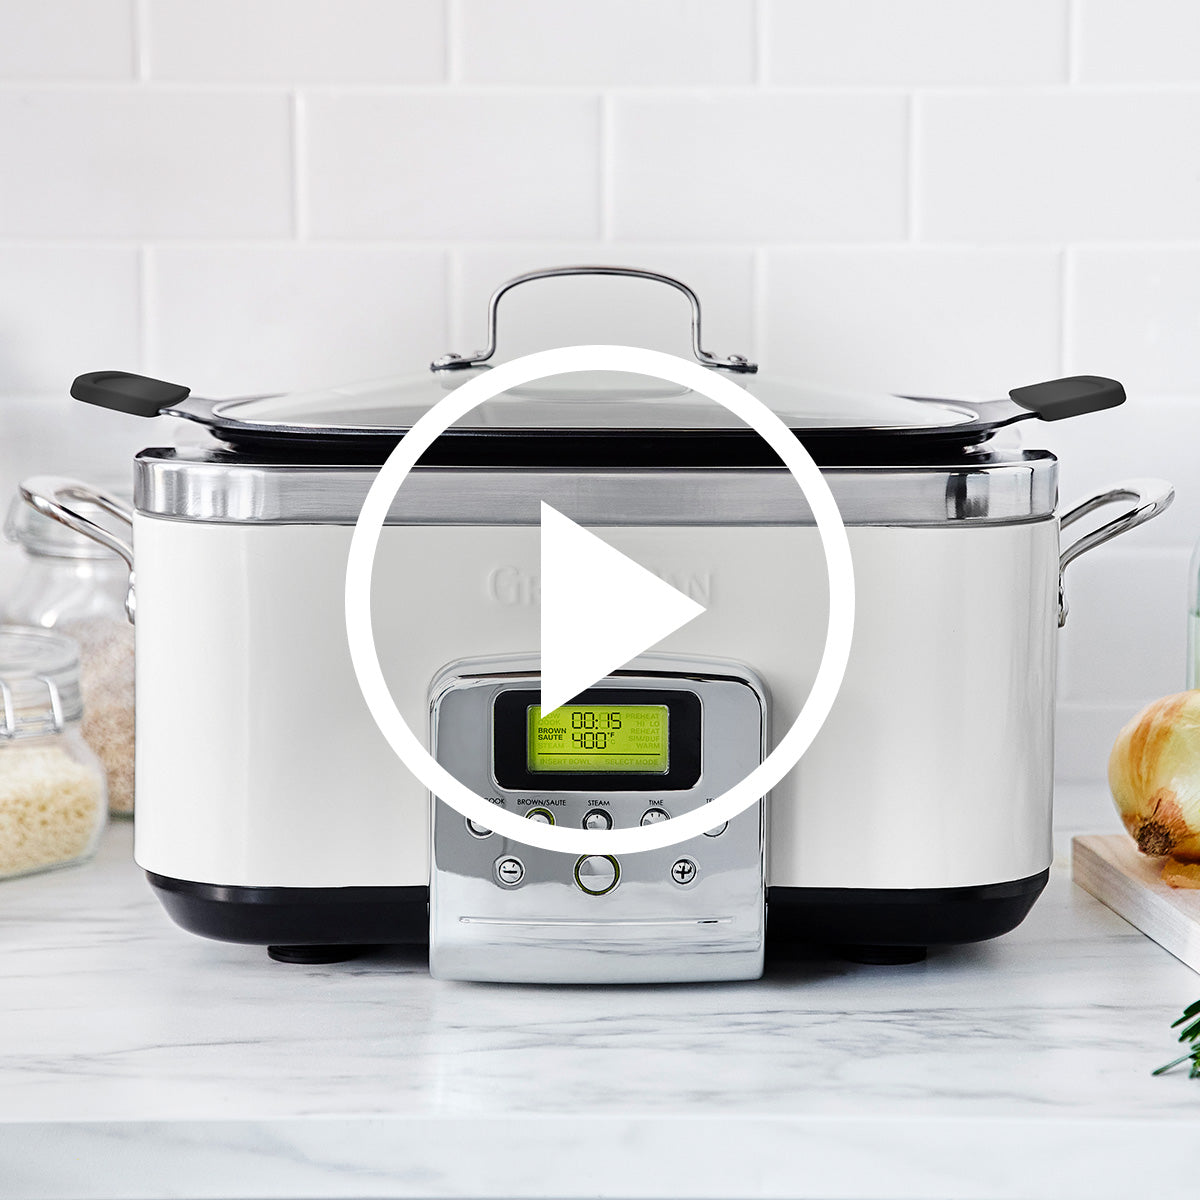 The All-Clad slow cooker is on sale for $30 off at